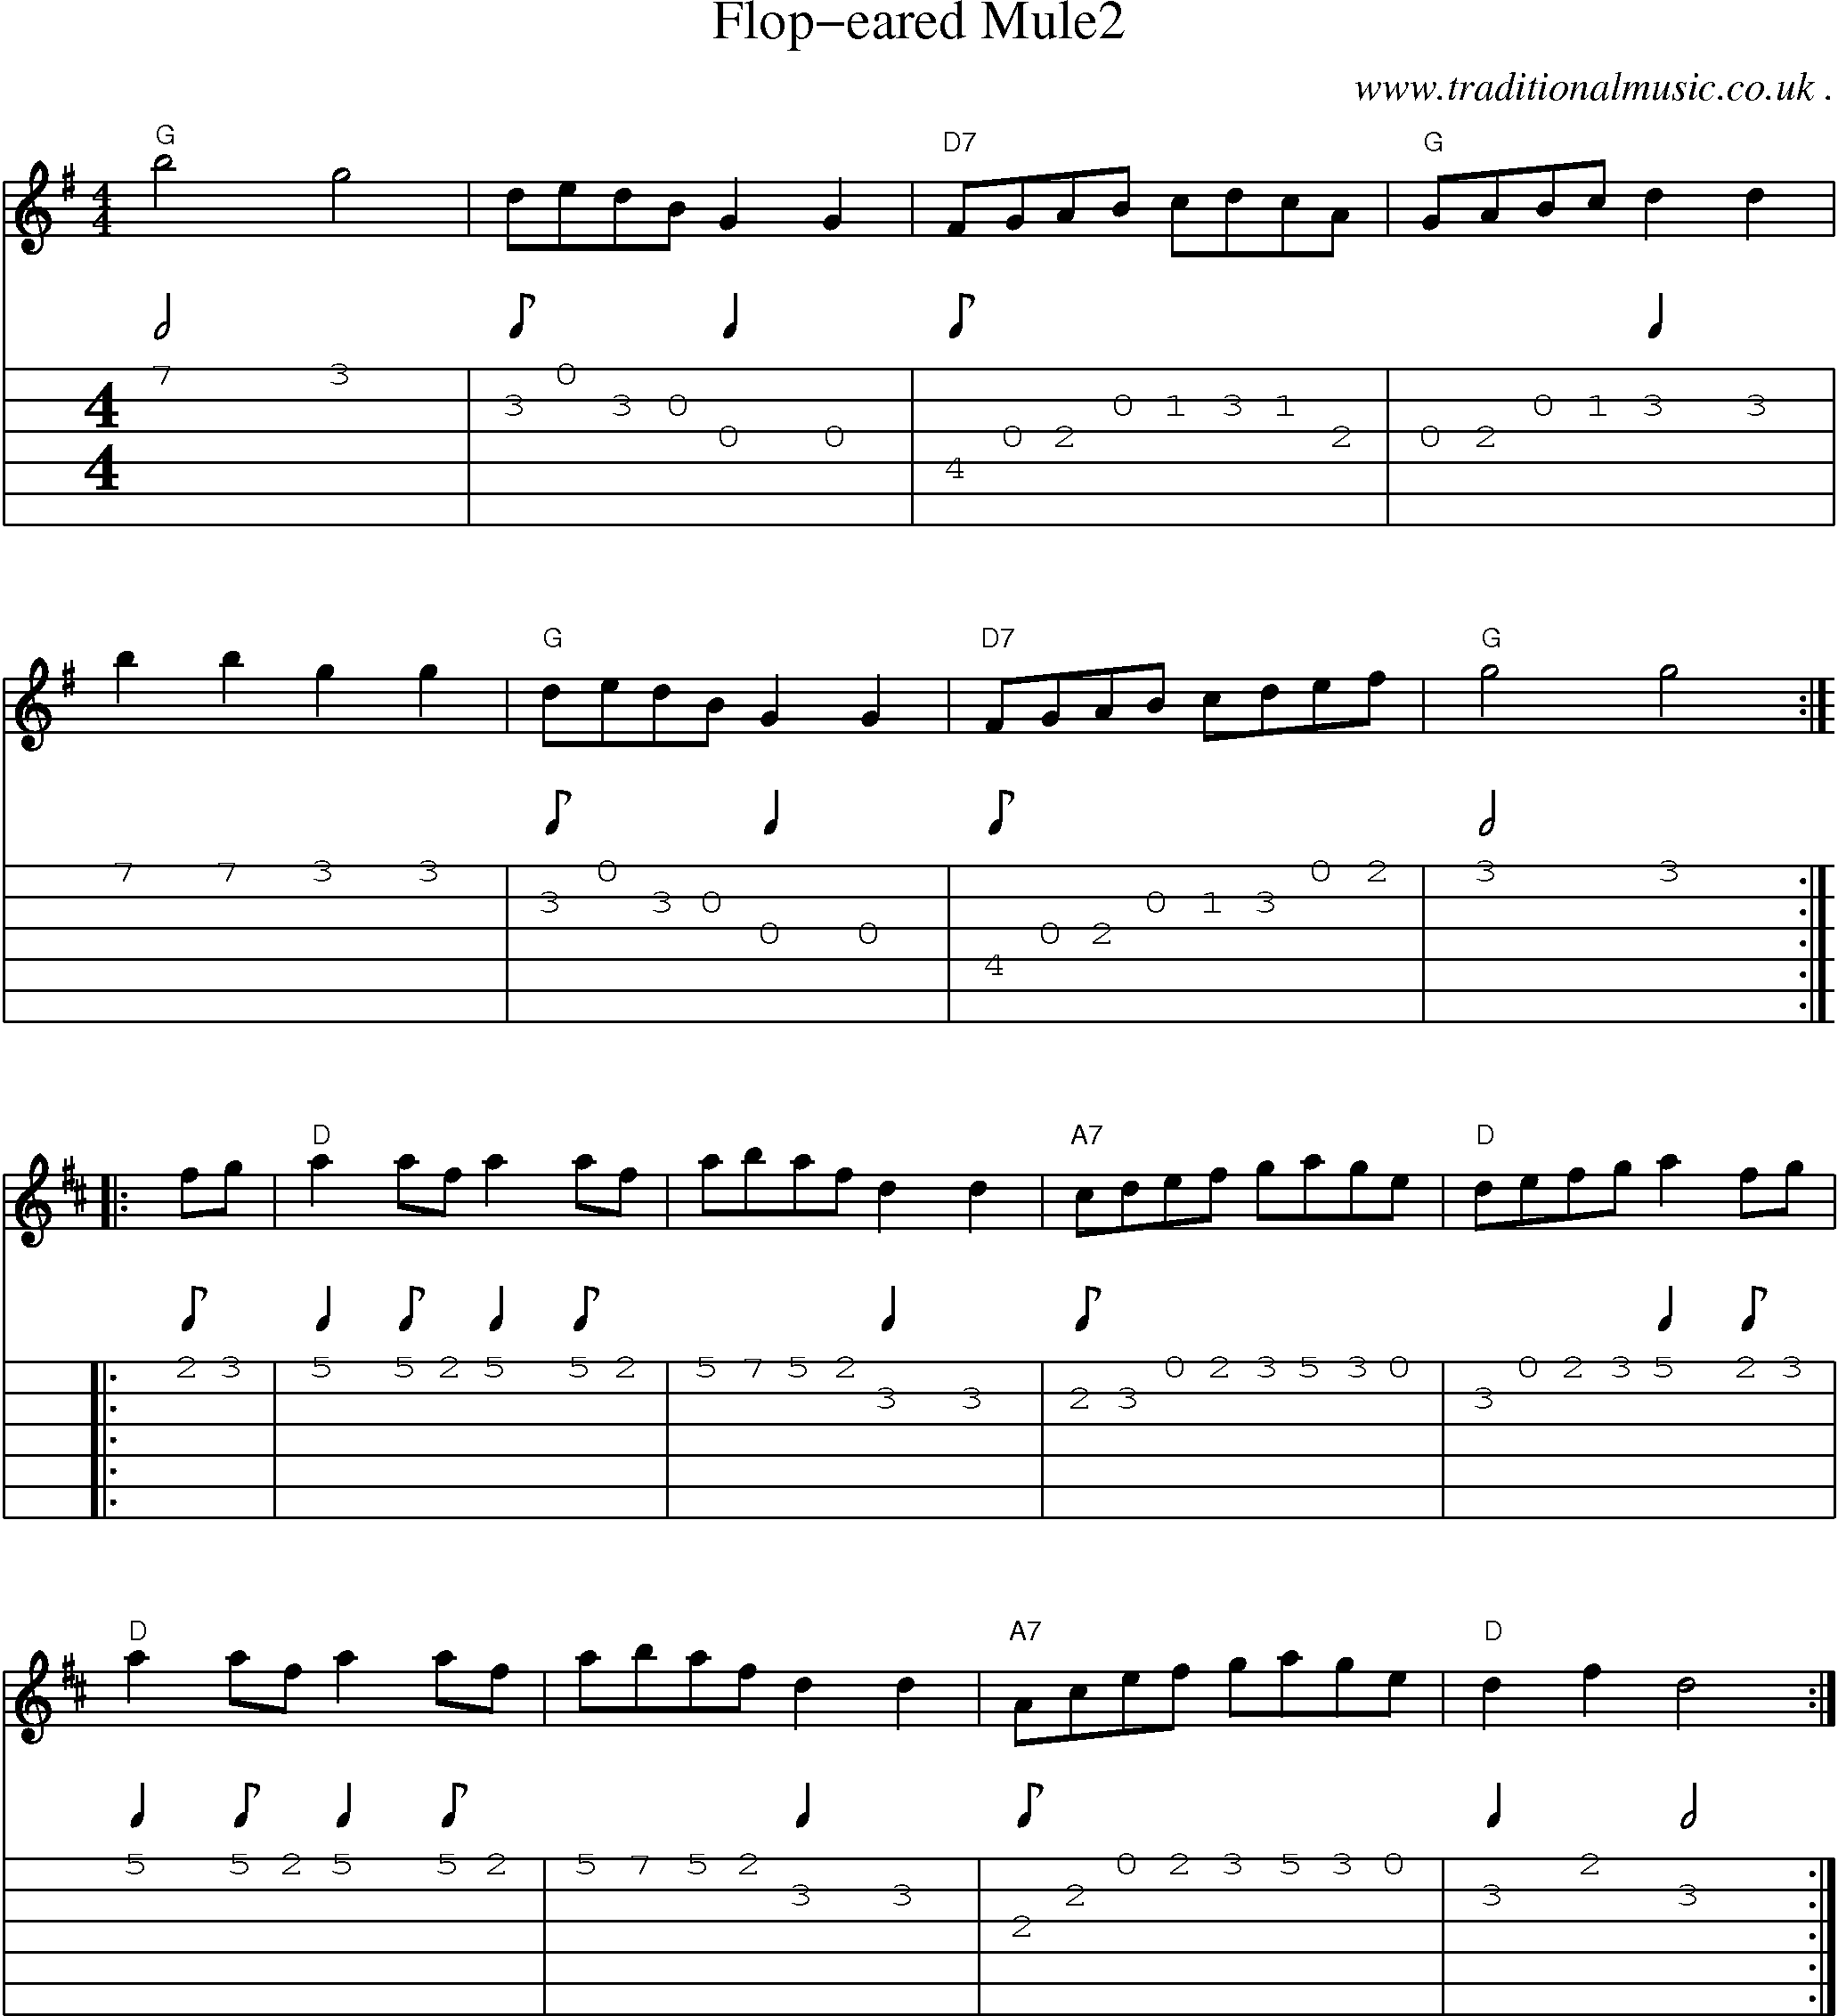 Music Score and Guitar Tabs for Flop-eared Mule2